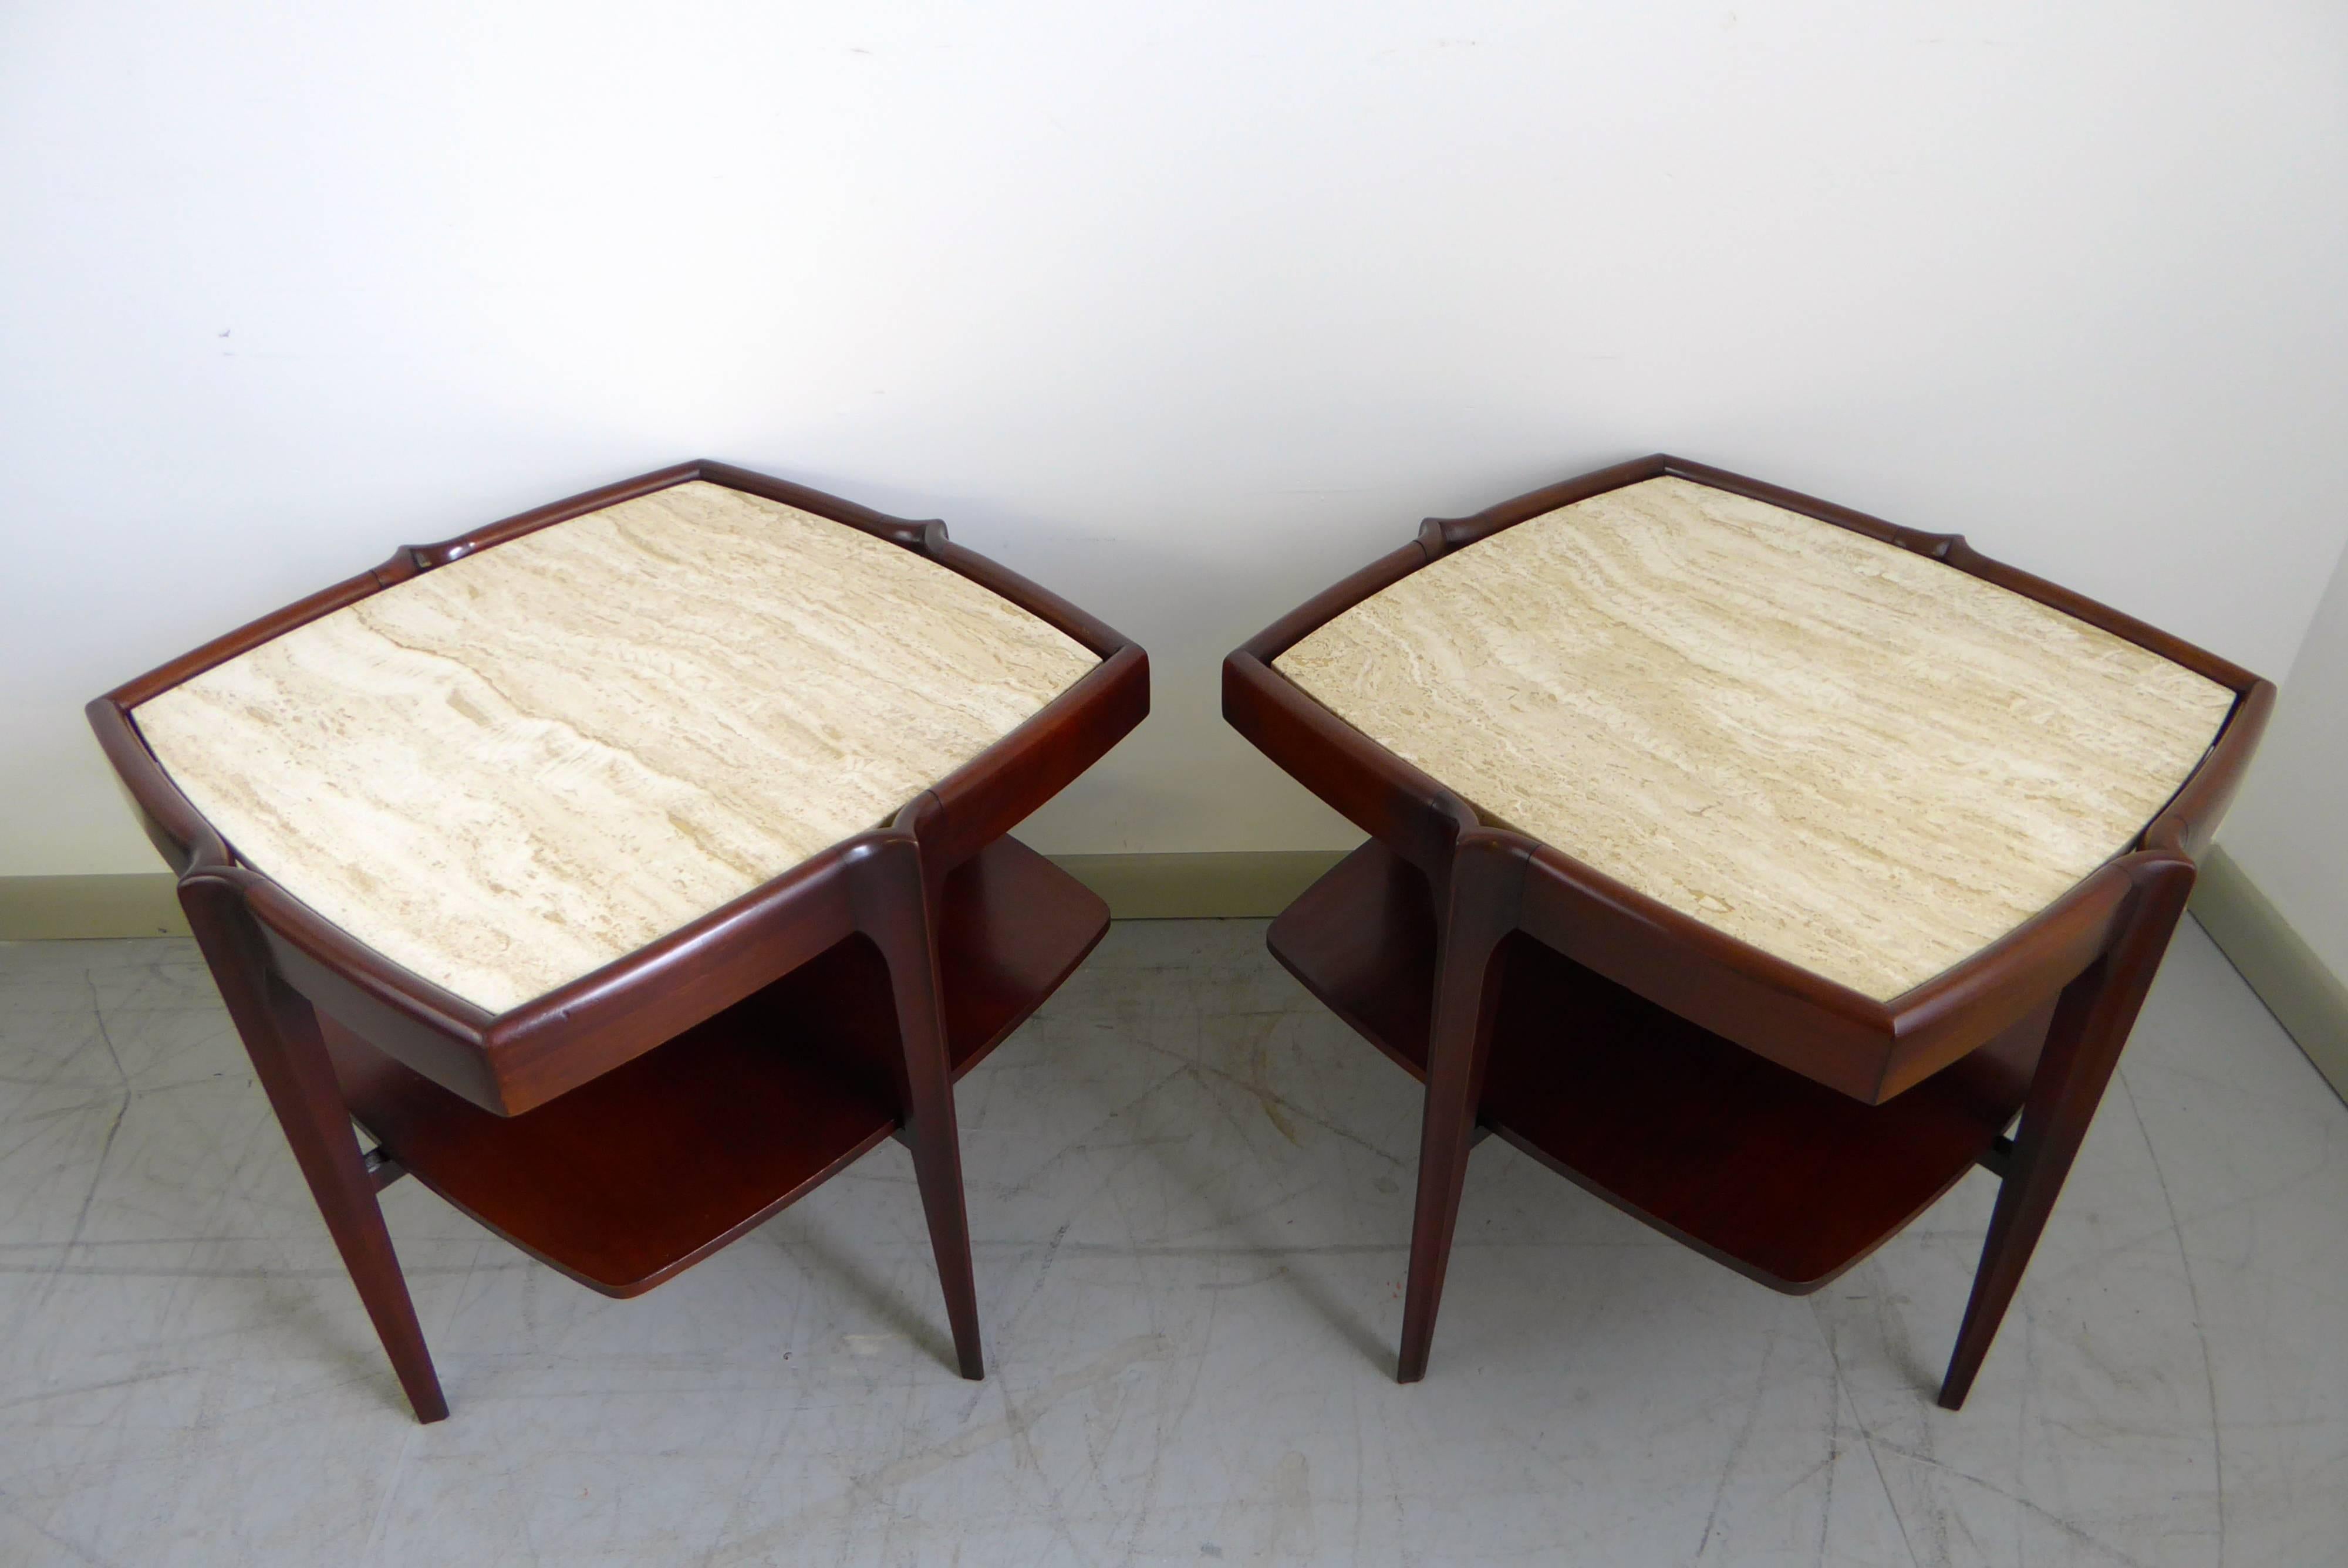 20th Century Sculptural Mahogany and Travertine Side Tables, 1960s